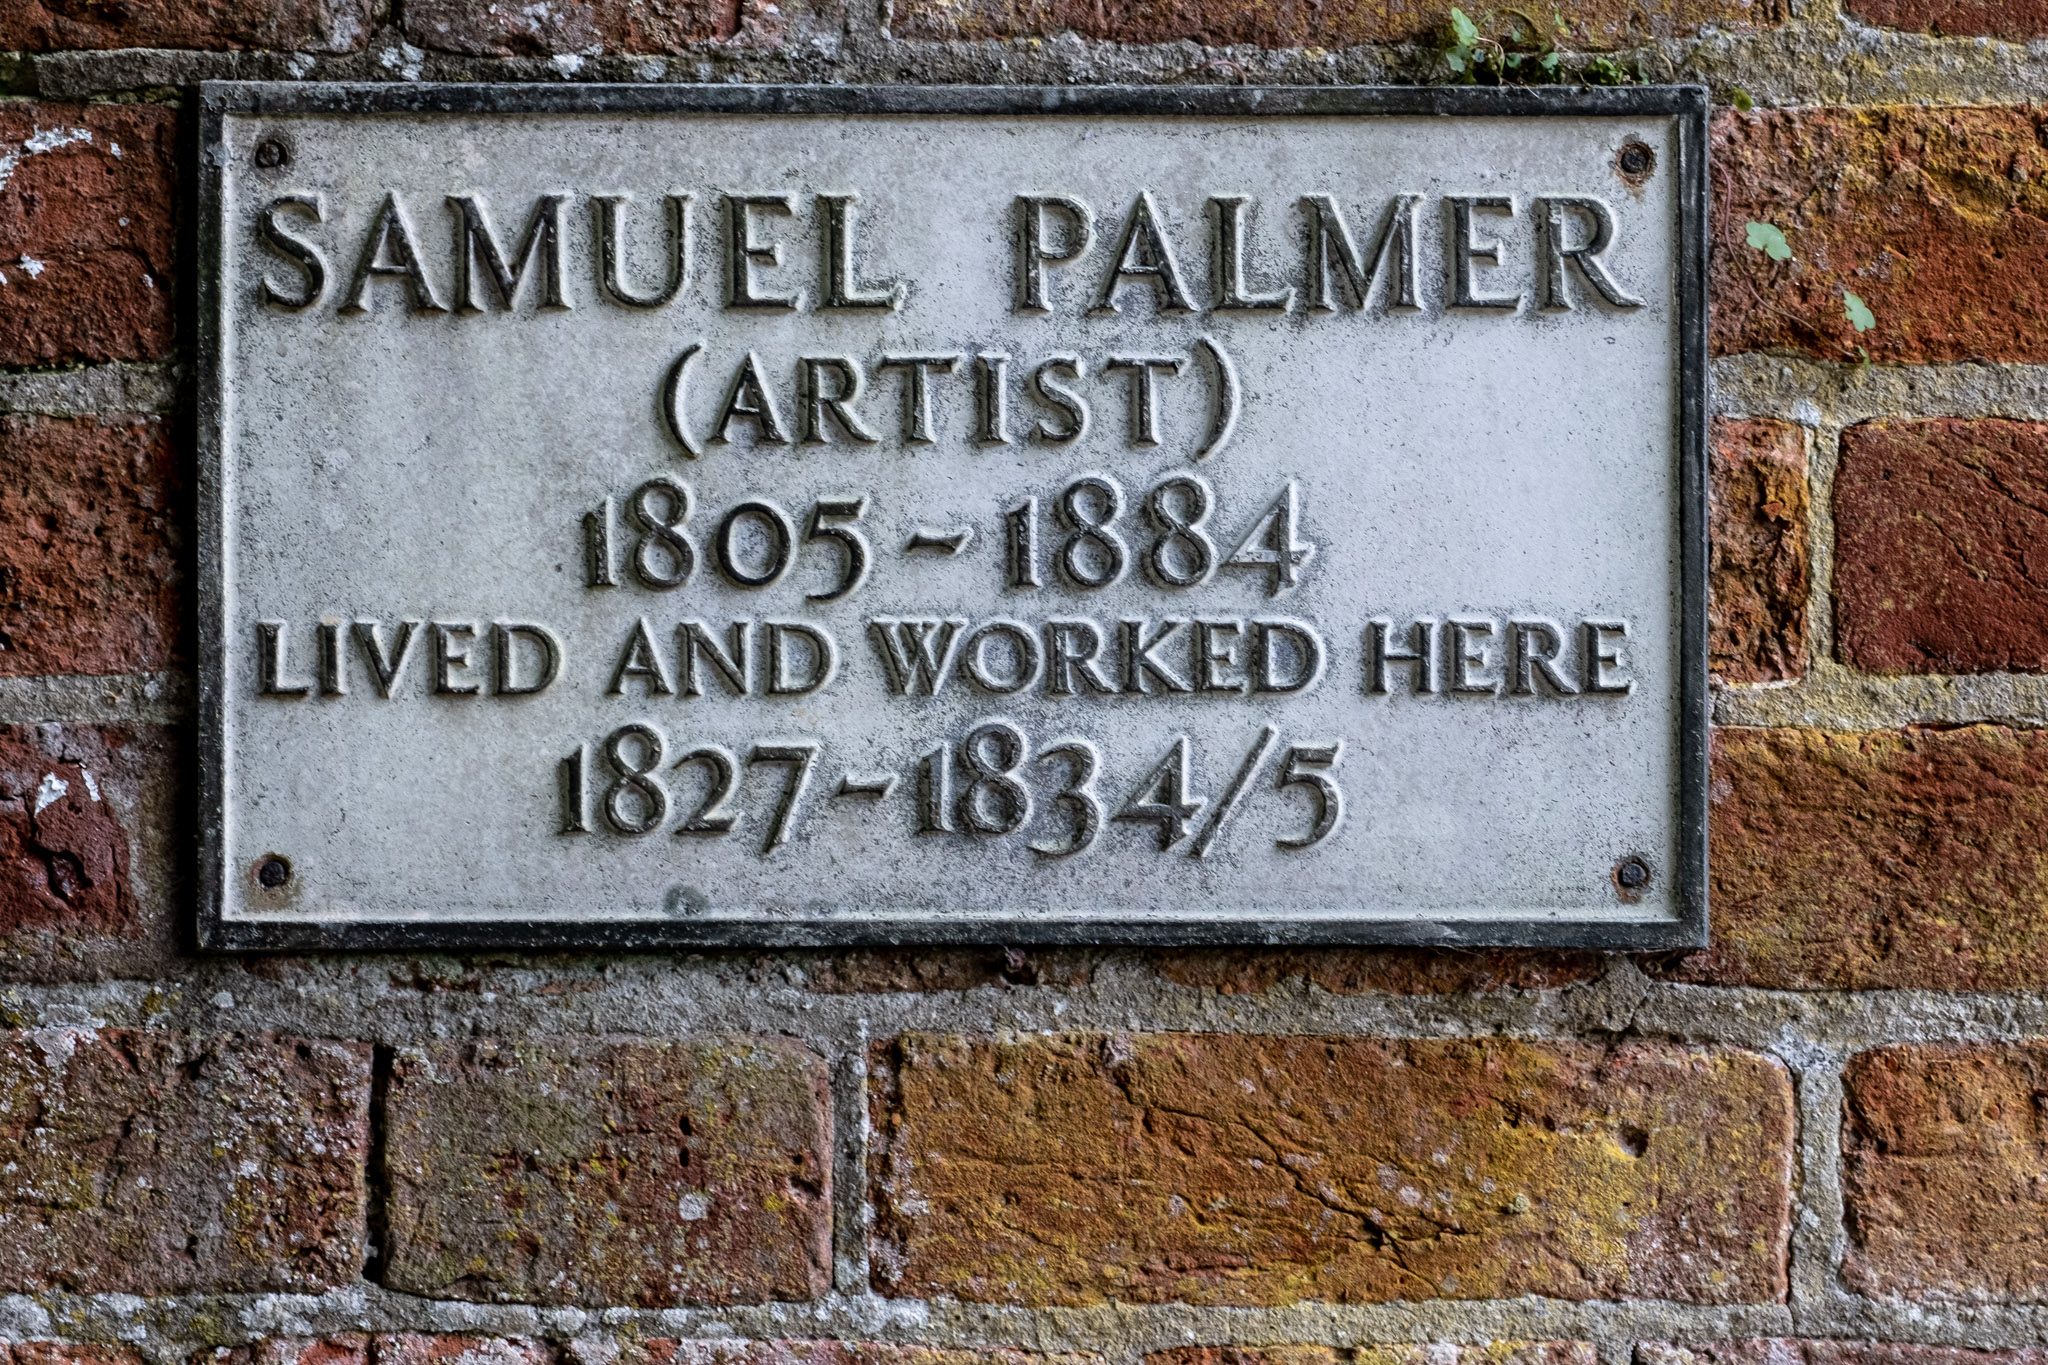 Sign about Samuel Palmer saying he lived and worked at this house 1827 to 1834